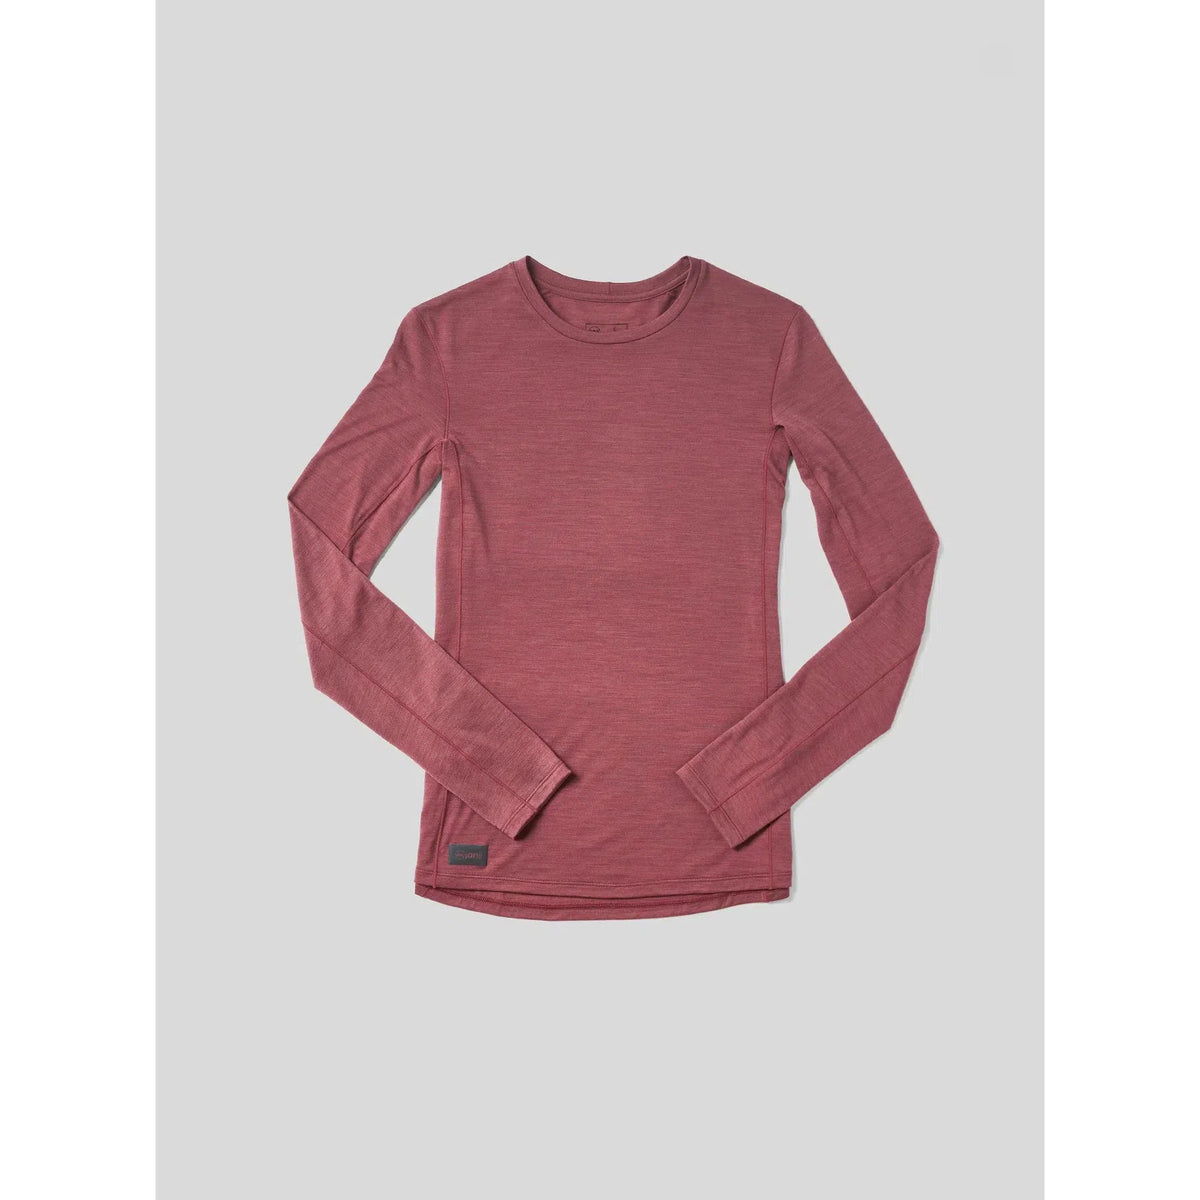 Women's Smartwool Intraknit Active Base Layer Long Sleeve